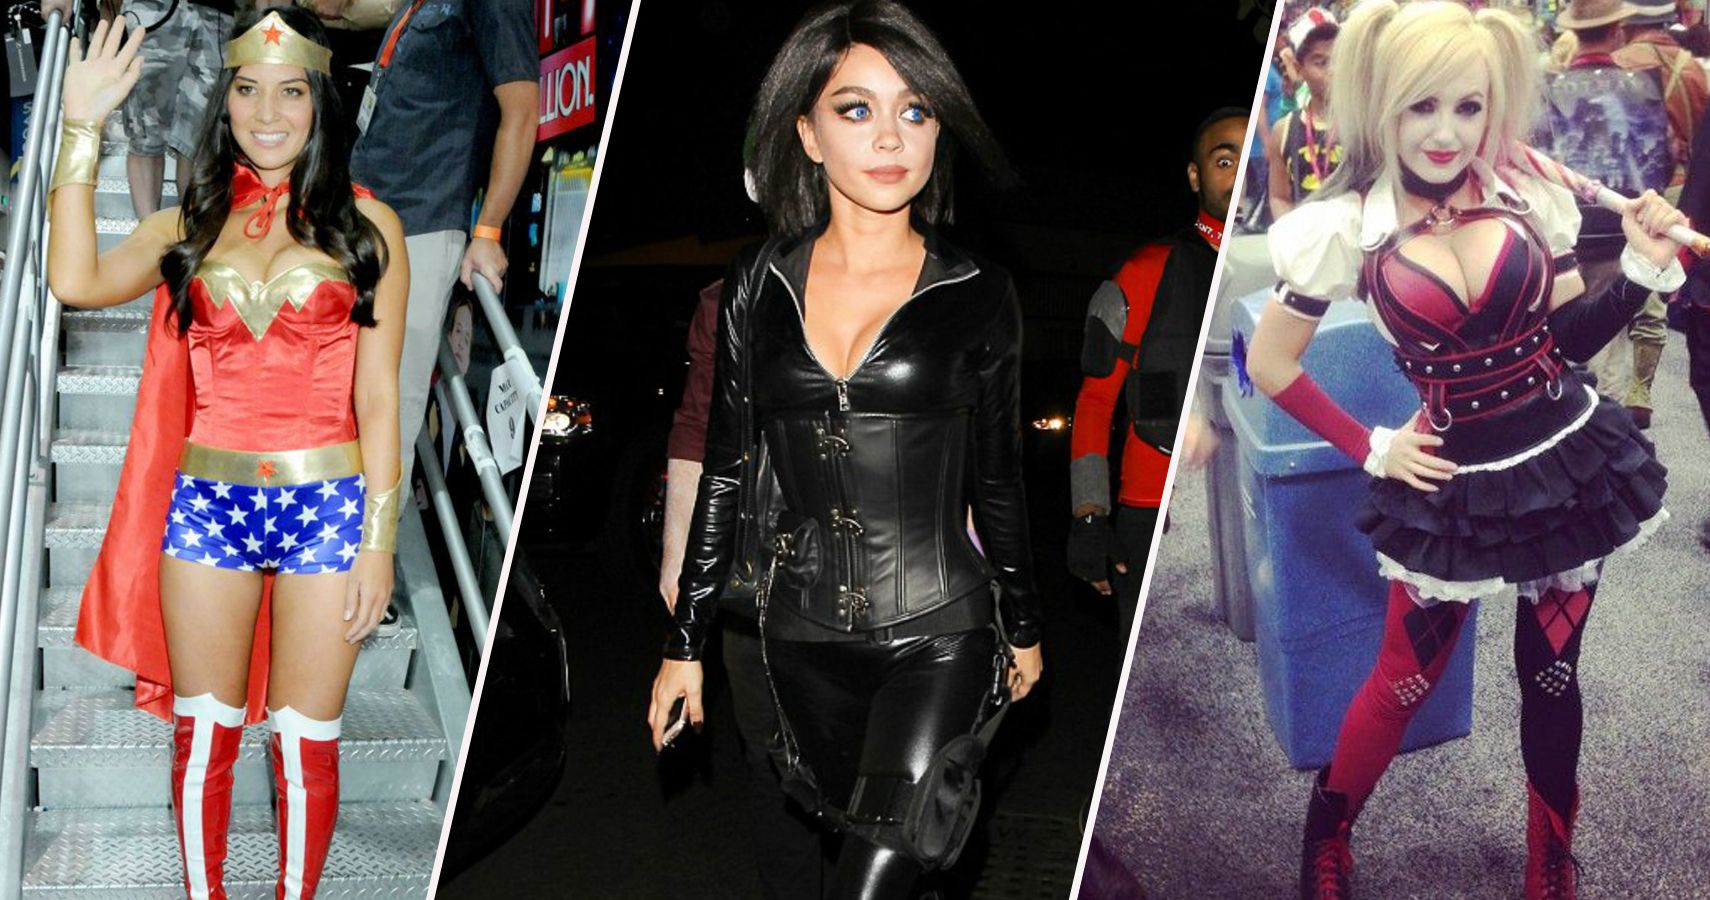 20 Candids Of Celebs Cosplaying